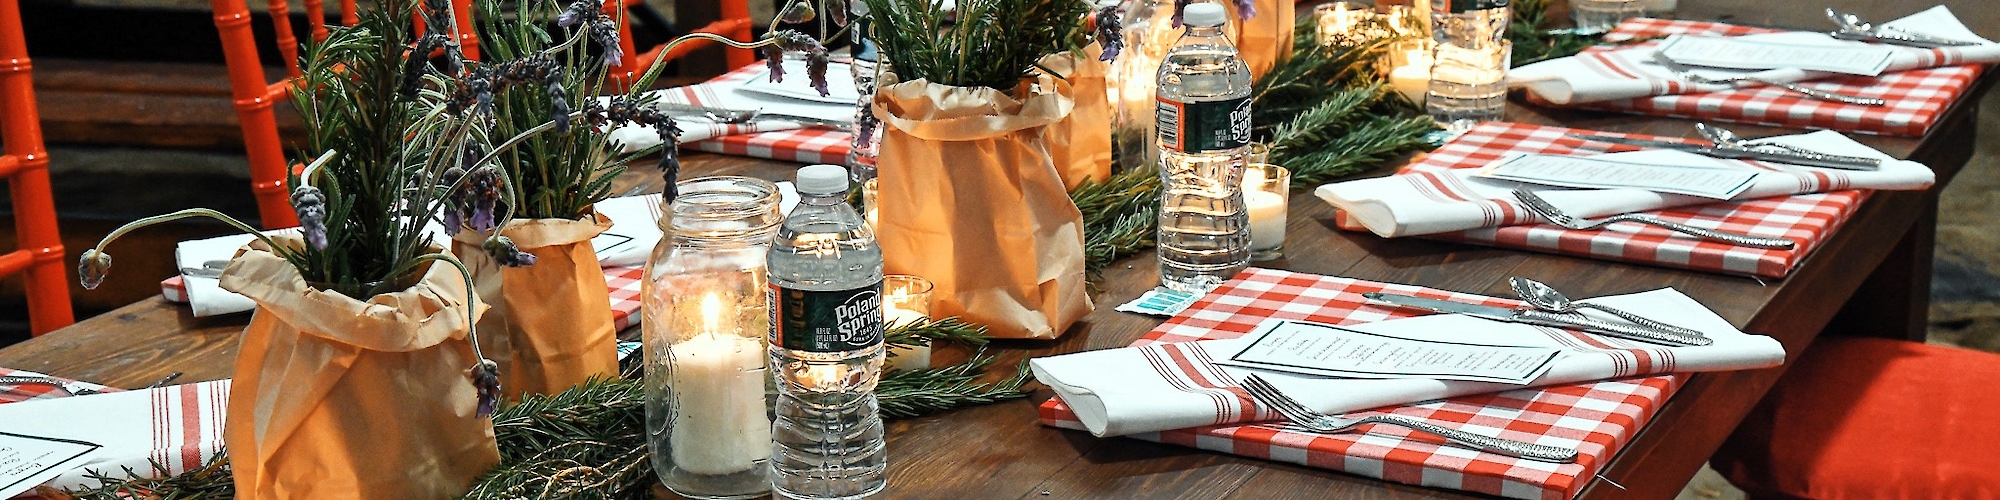 Tables dressed in gingham and natural decor at The Preserve event venue.